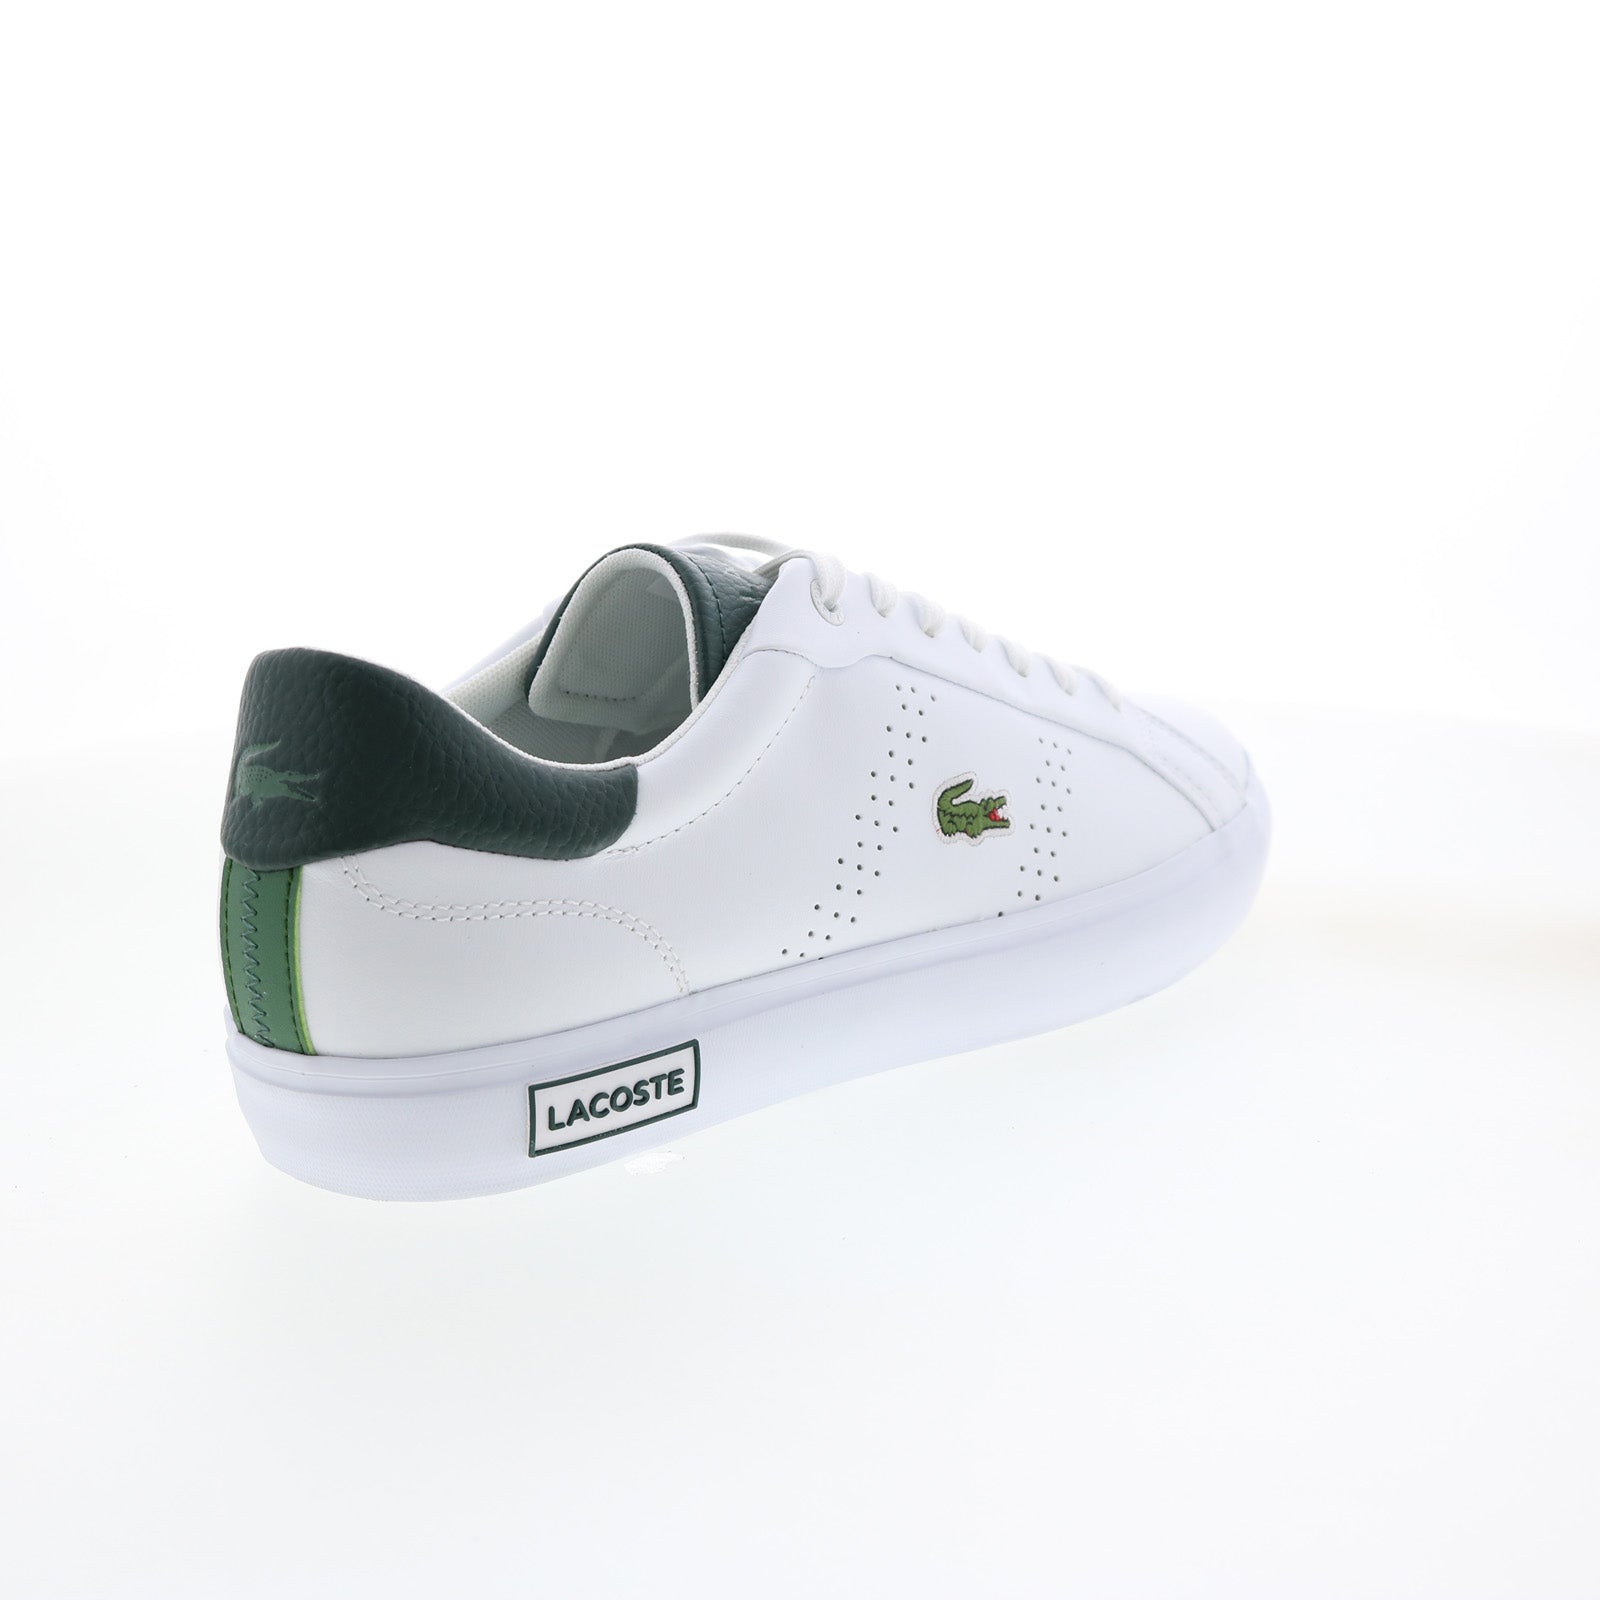 hende Standard måtte Lacoste Powercourt 2.0 123 1 Mens White Leather Lifestyle Sneakers Sho -  Ruze Shoes